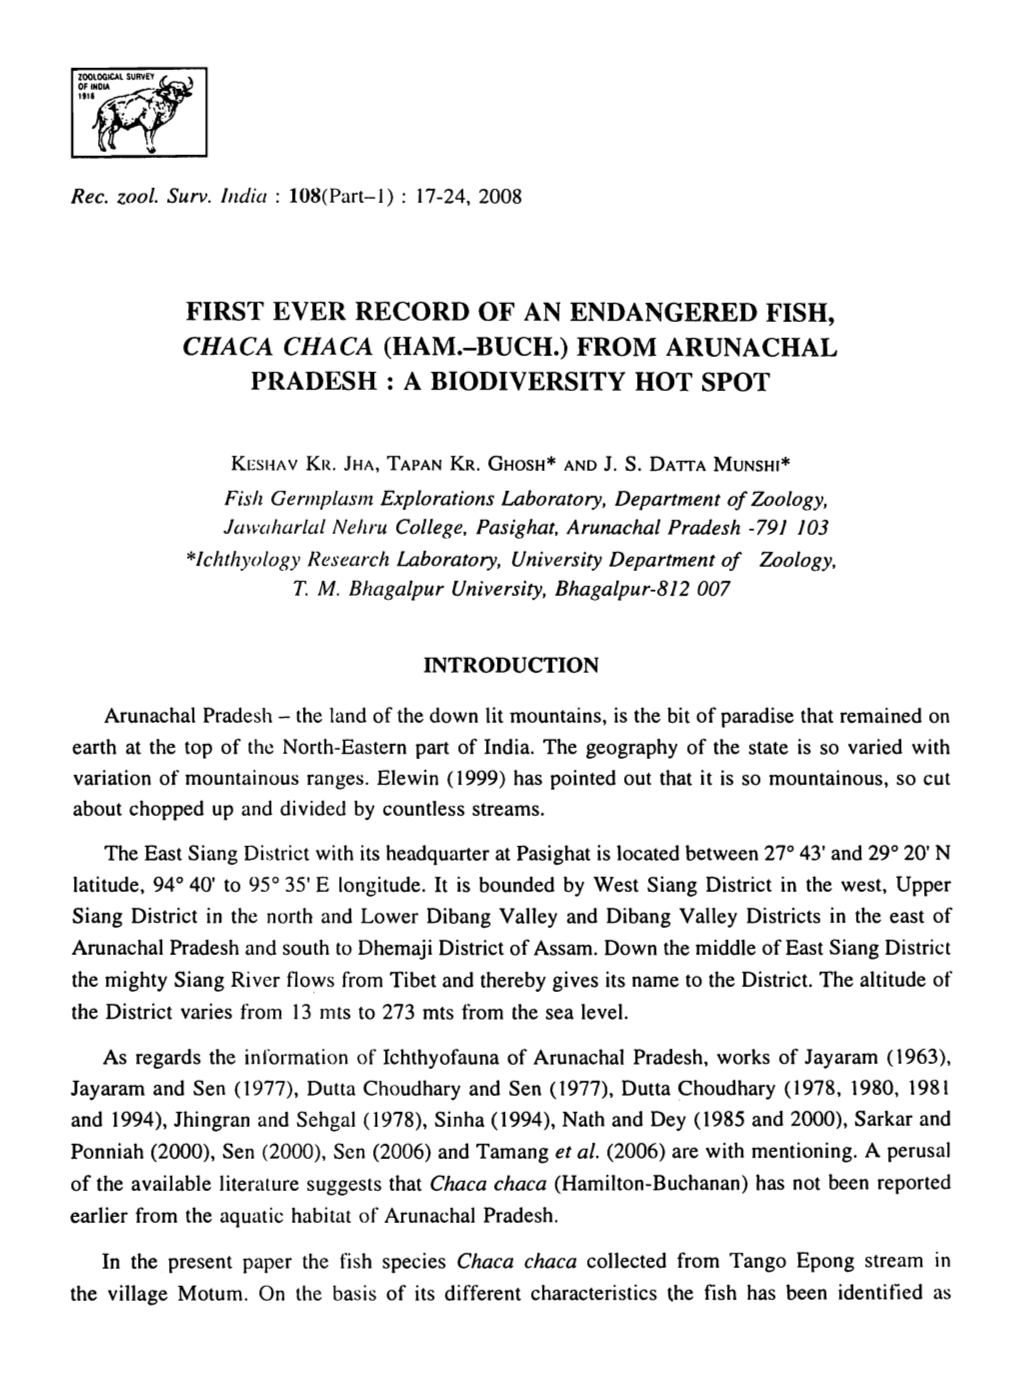 First Ever Record of an Endangered Fish, Chaca Chaca (Ham.-Buch.) from Arunachal Pradesh: a Biodiversity Hot Spot